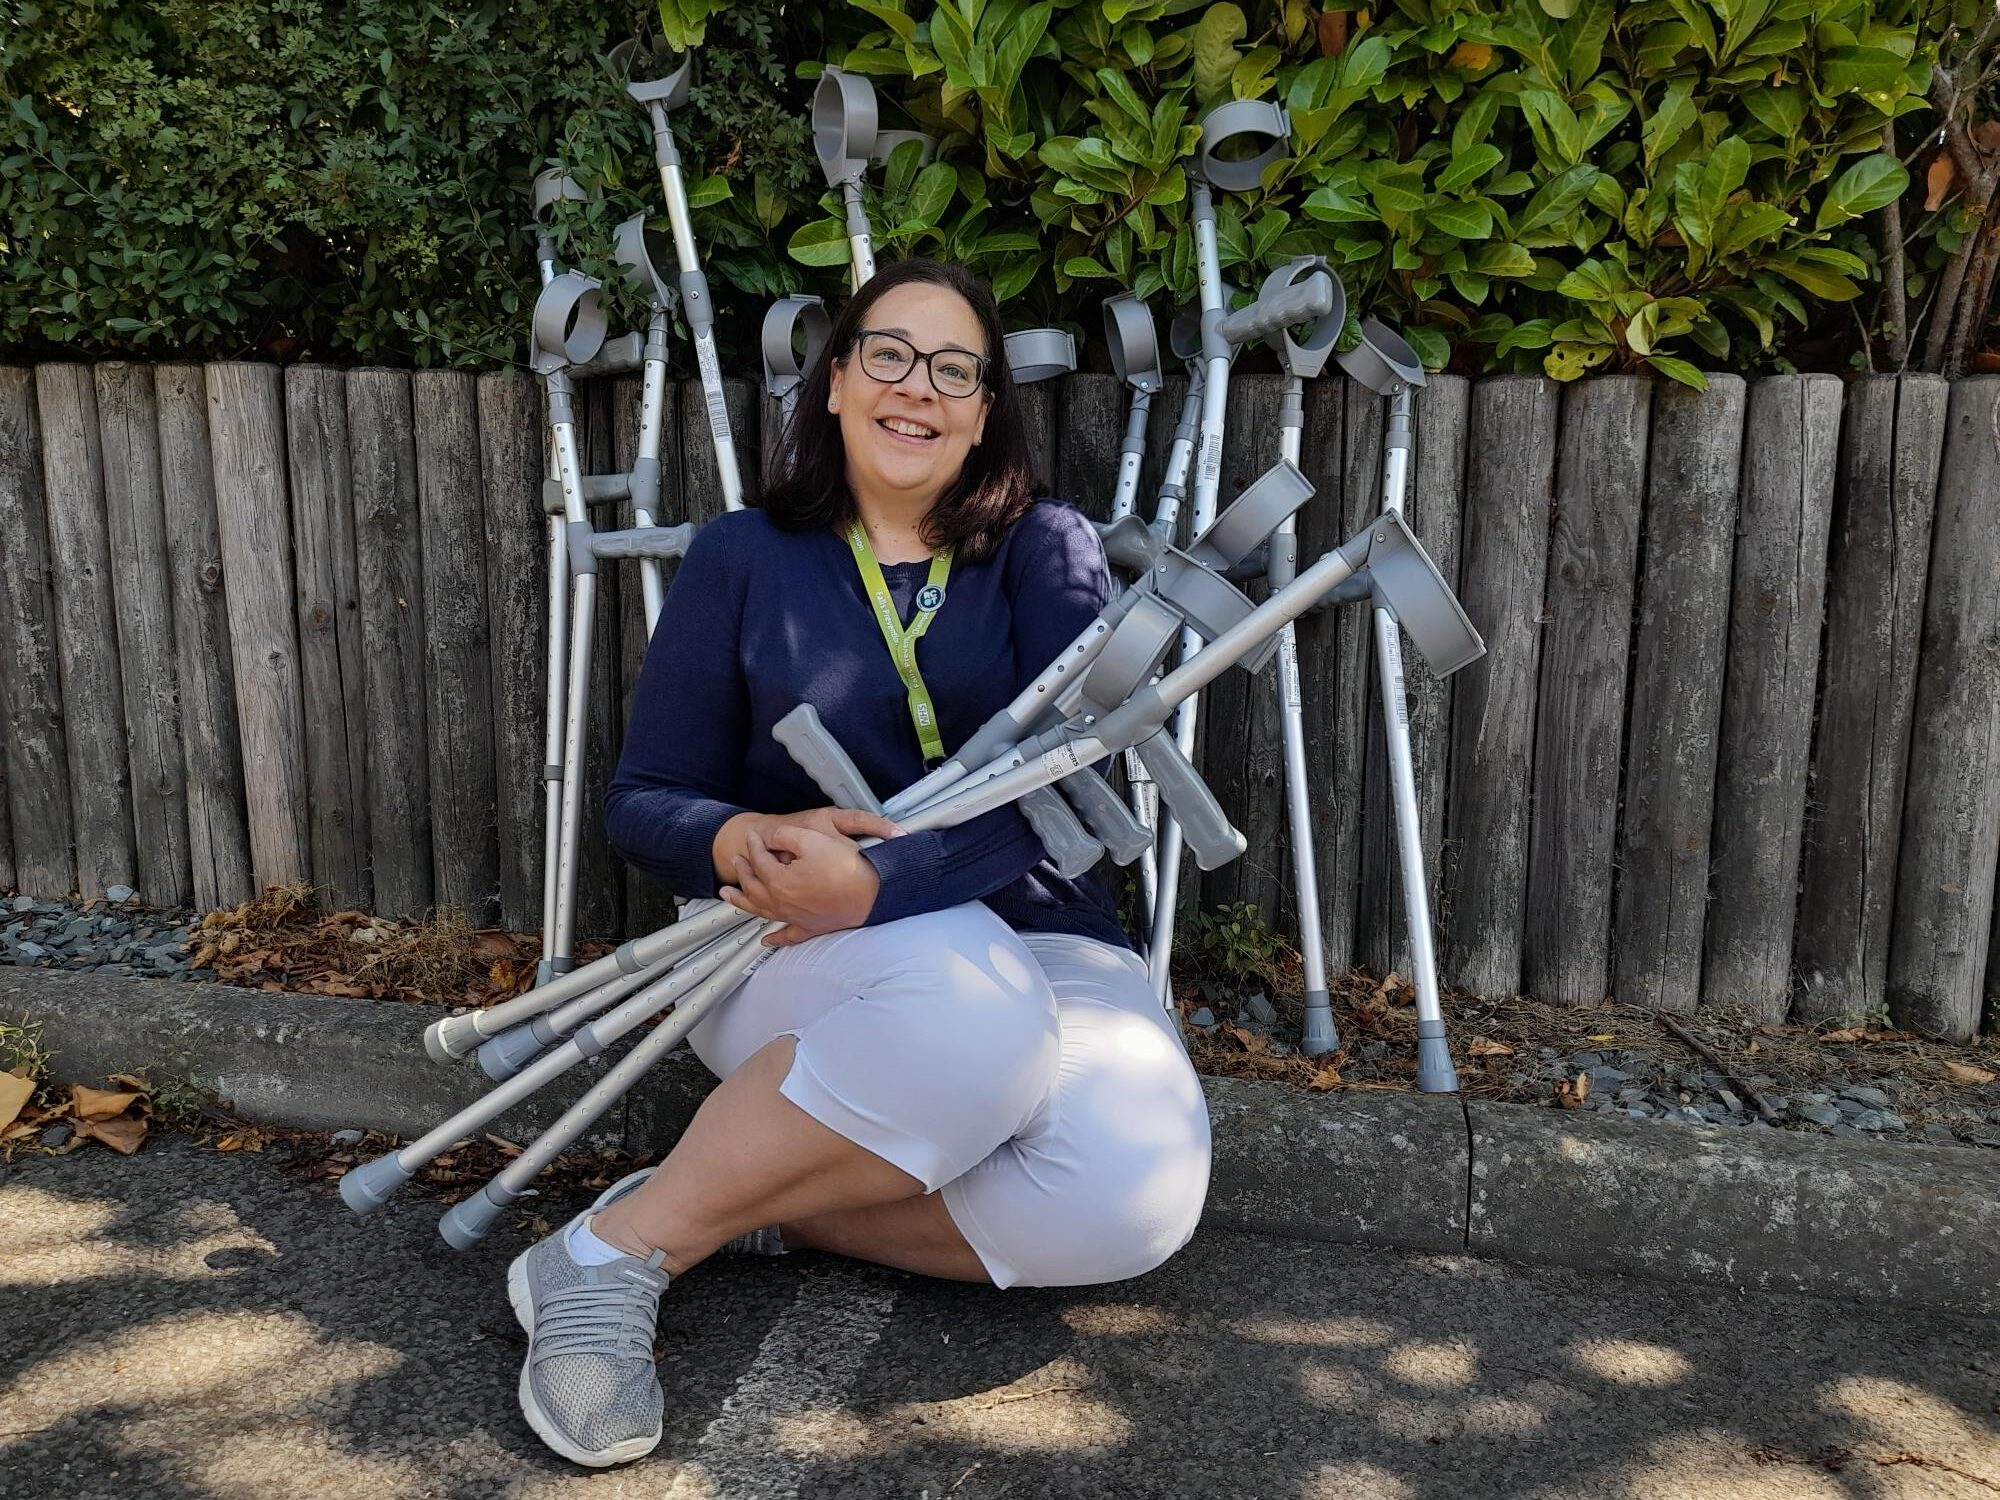 Occupational therapist manager Shirley Rashid, with a stock of elbow crutches